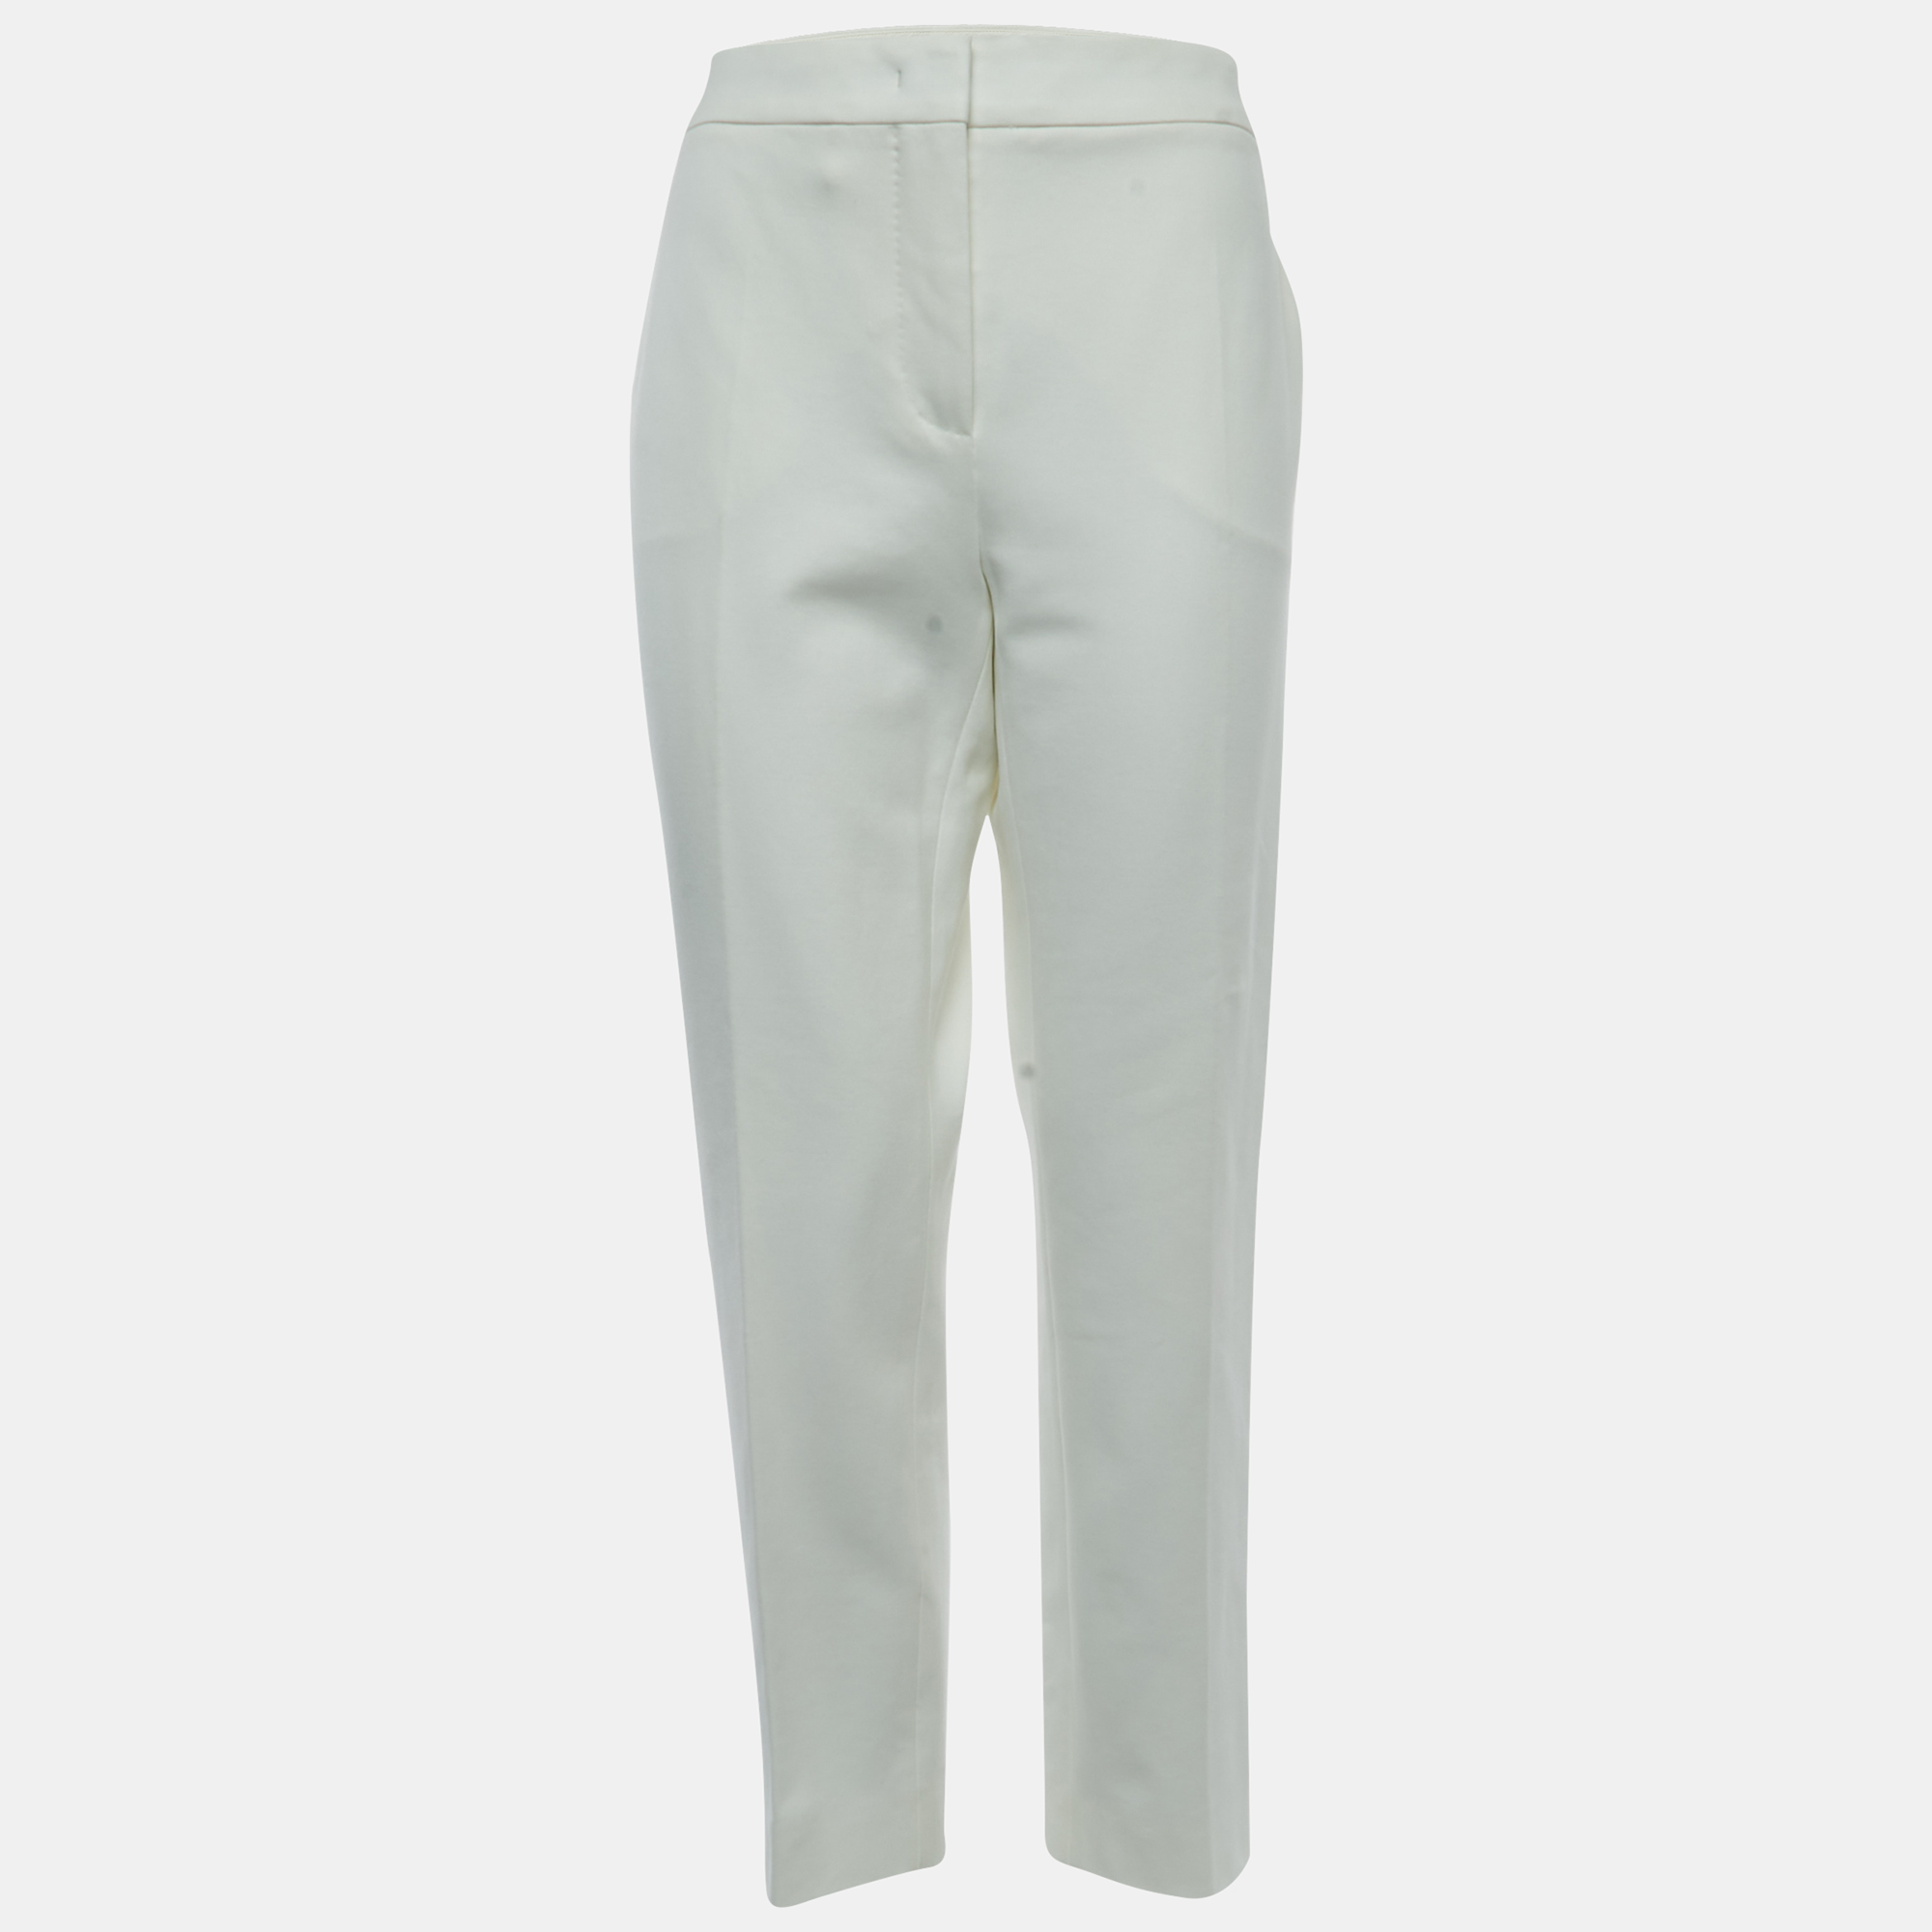 Max Mara White Jersey Knit Tapered Trousers XL